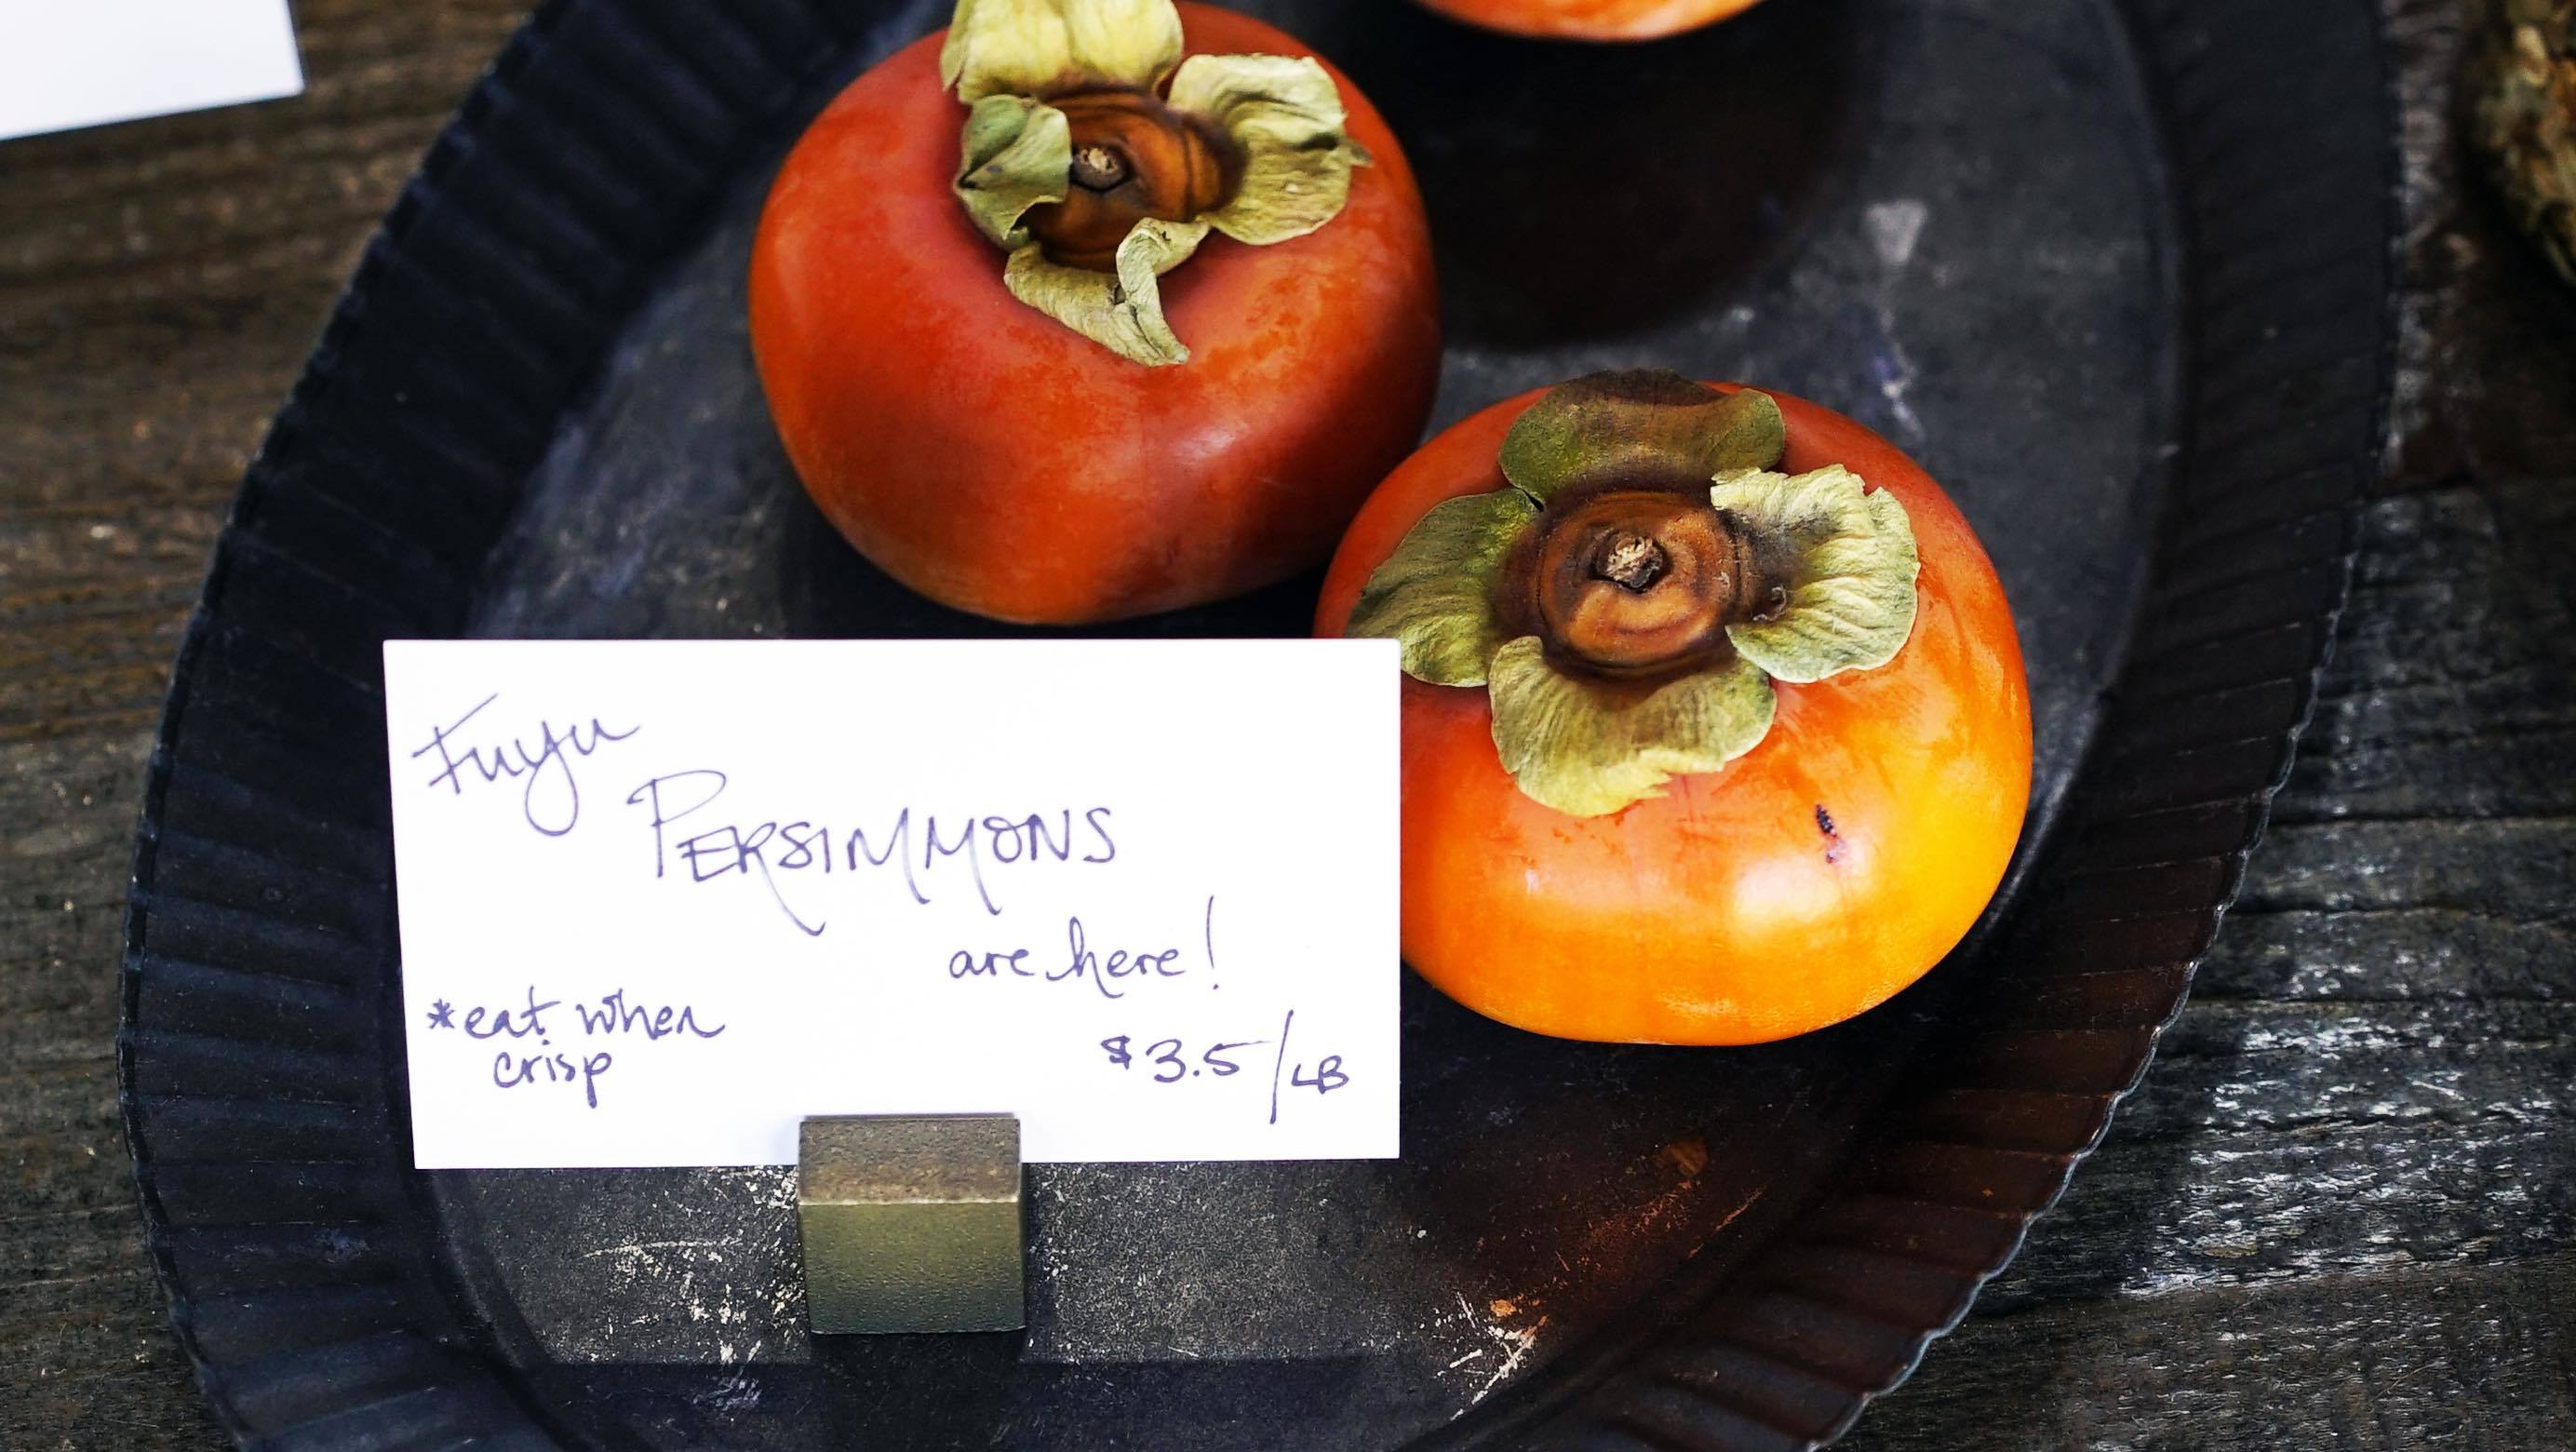 Gallery Persimmons